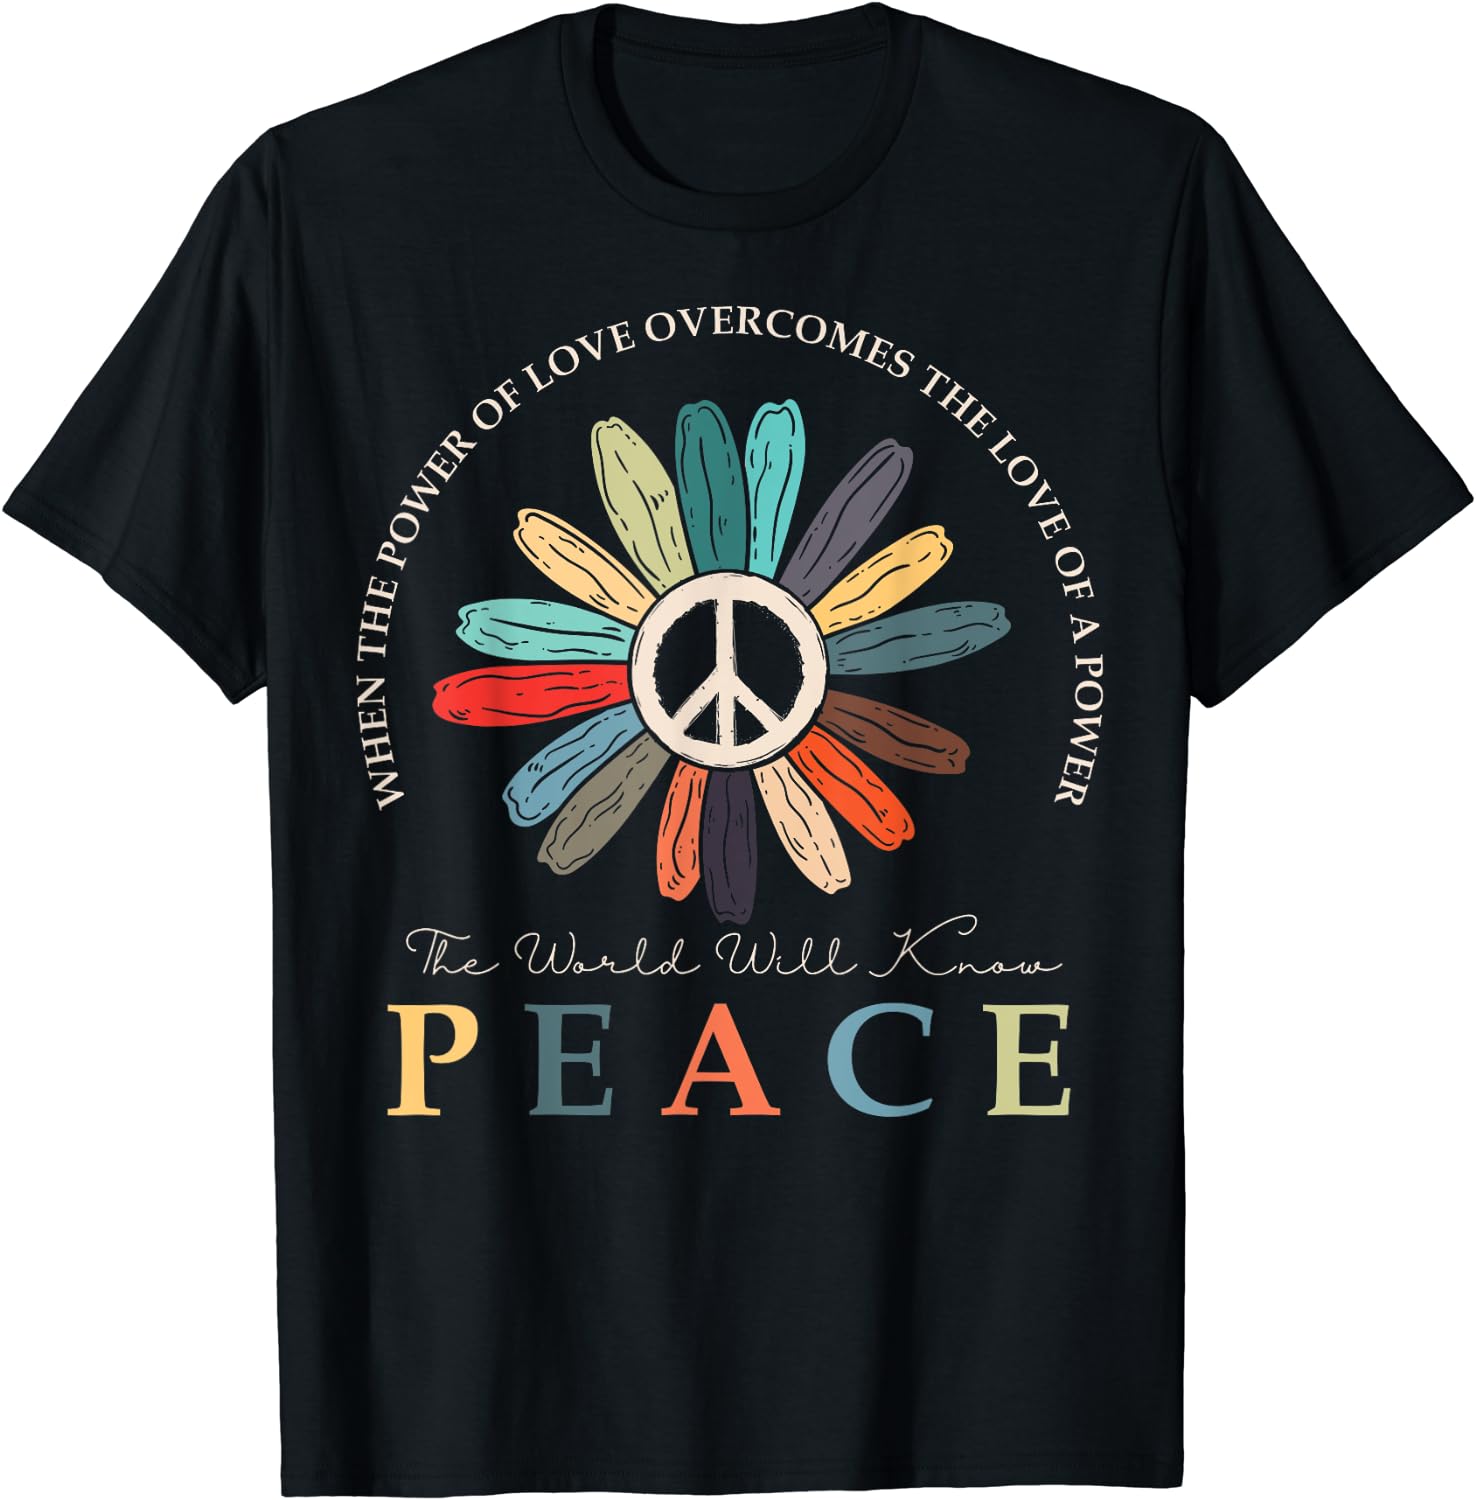 When The Power Of Love Overcomes The Love Of Power Flowers T-Shirt ...